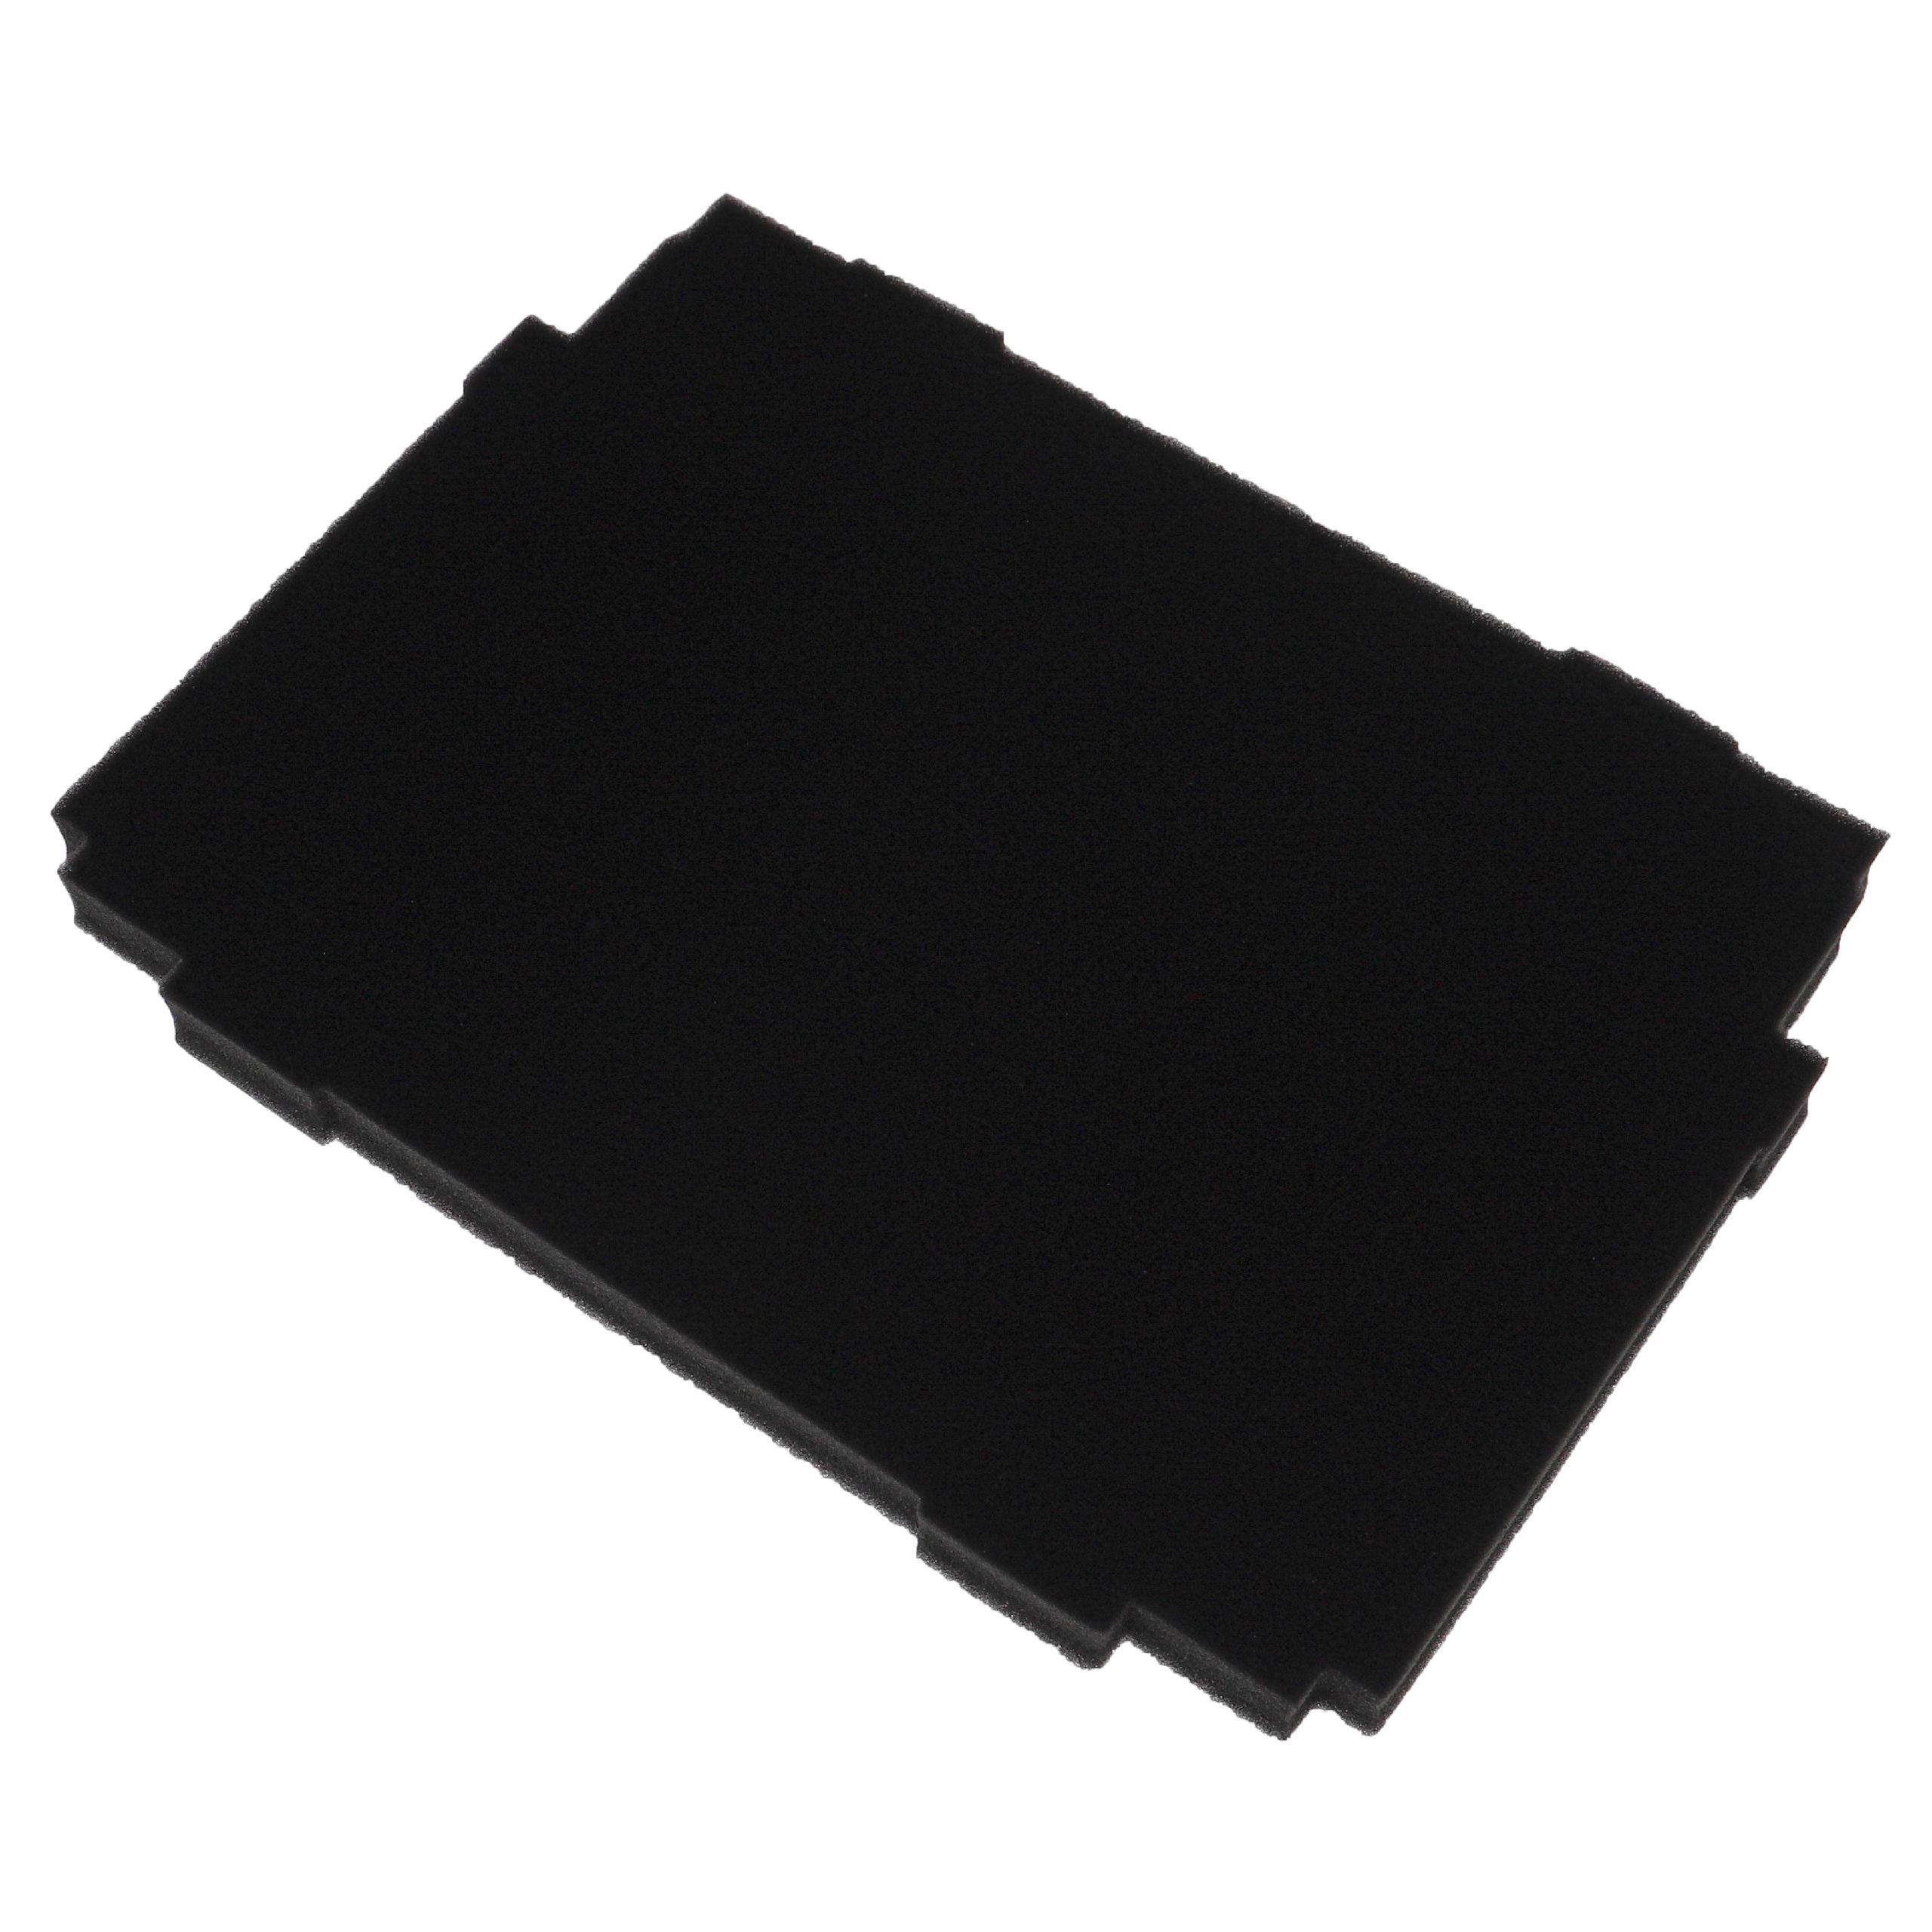 vhbw Foam Insert Replacement for 4250155837464 for Toolbox - Customisable, Adaptable Foam Black